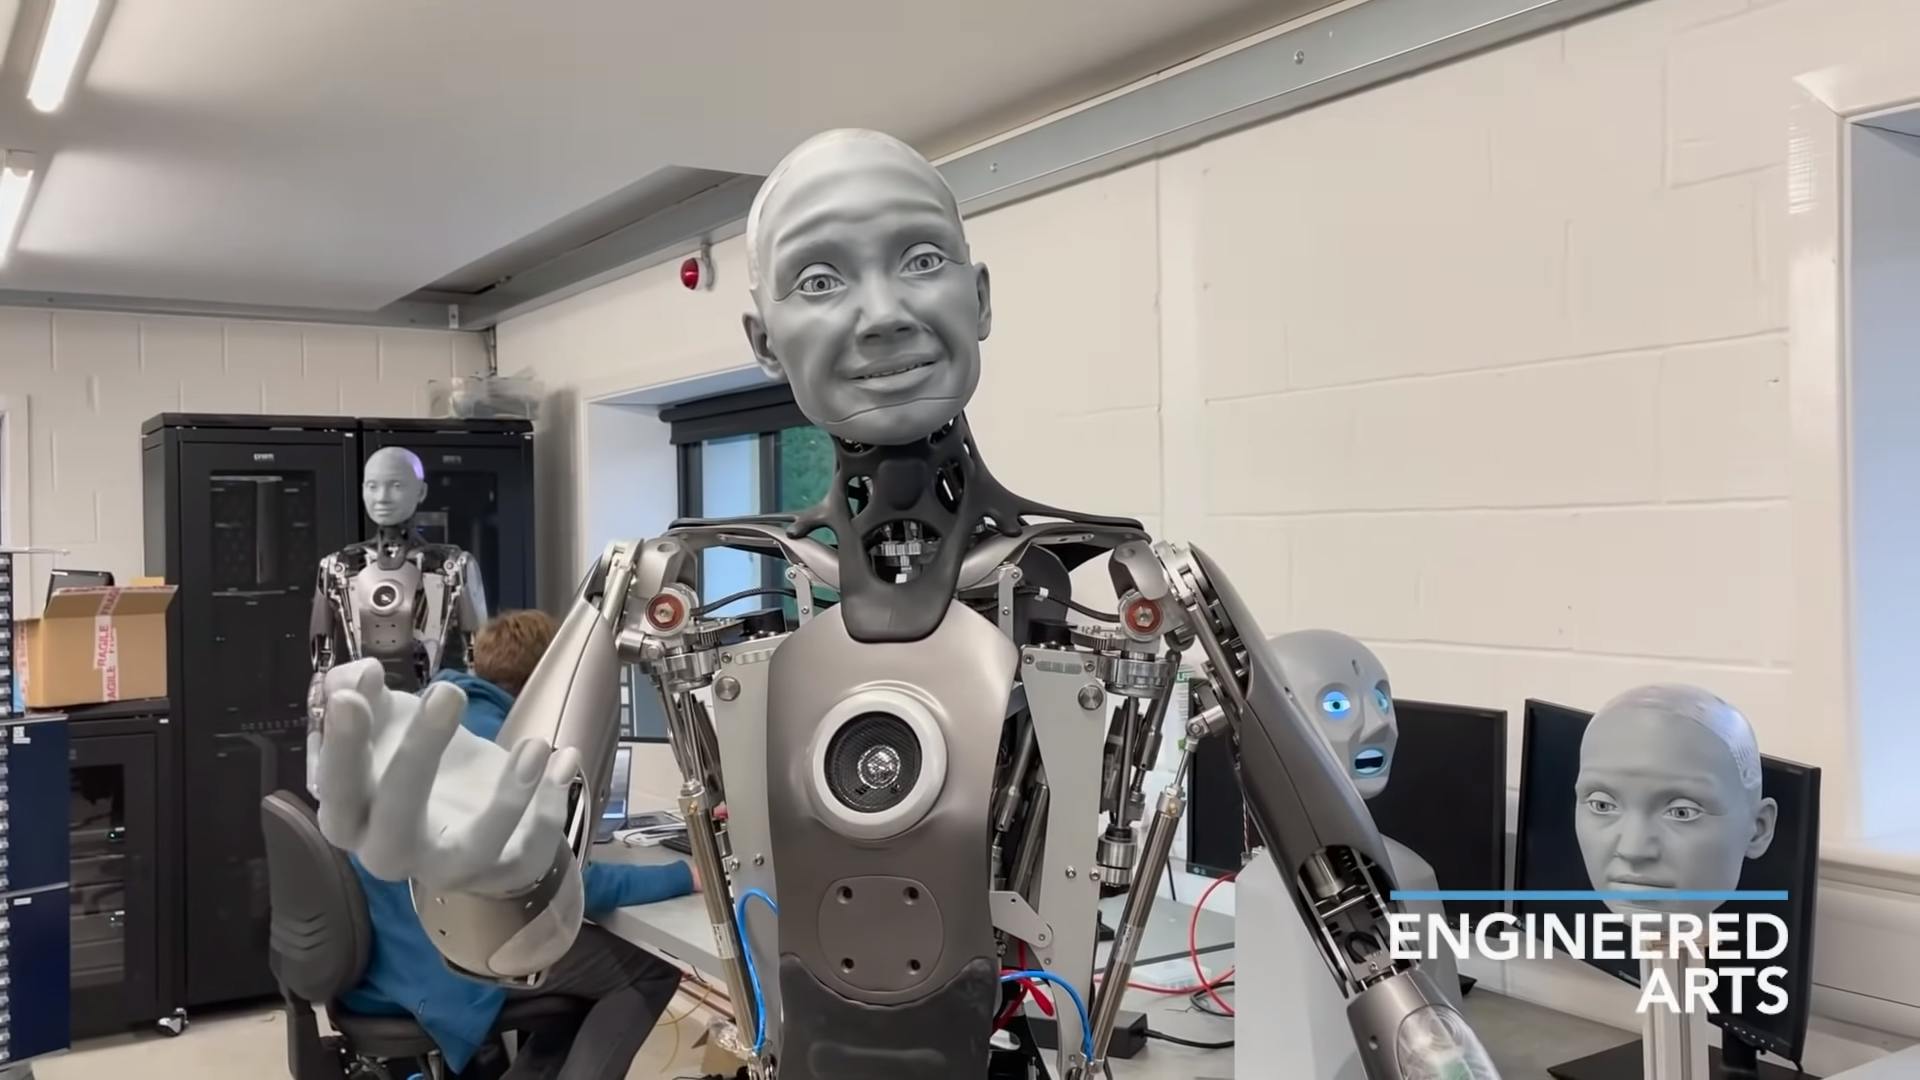 This Robot Wakes Up | Electronic Design